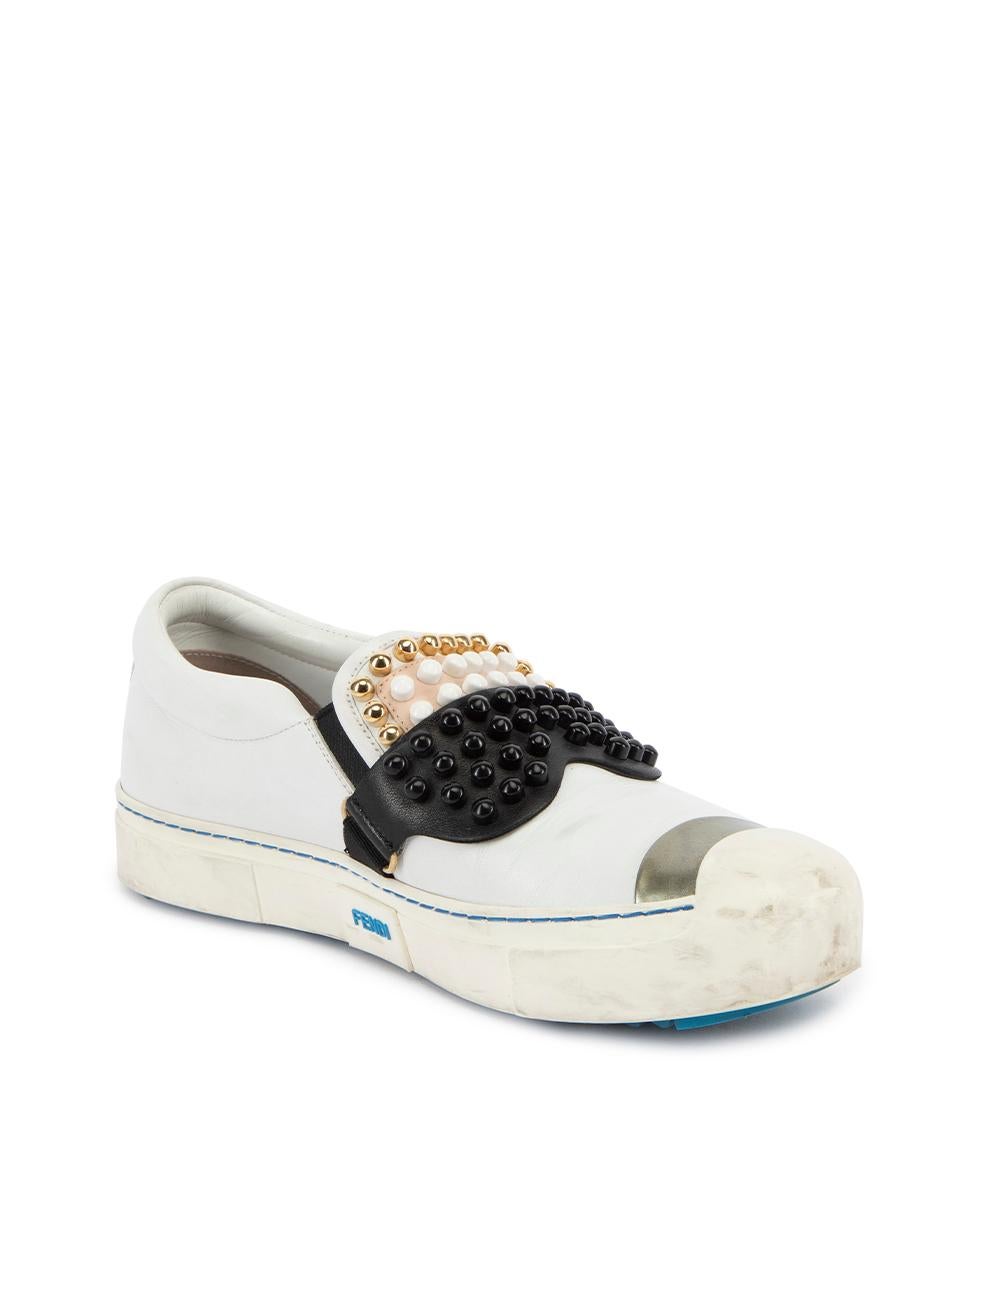 CONDITION is Very good. Minimal wear to sneaker is evident. Minimal wear to the leather exterior and midsole where marks/scuffs can be seen on this used Fendi designer resale item. This item includes the original dust bags. Details Unisex White